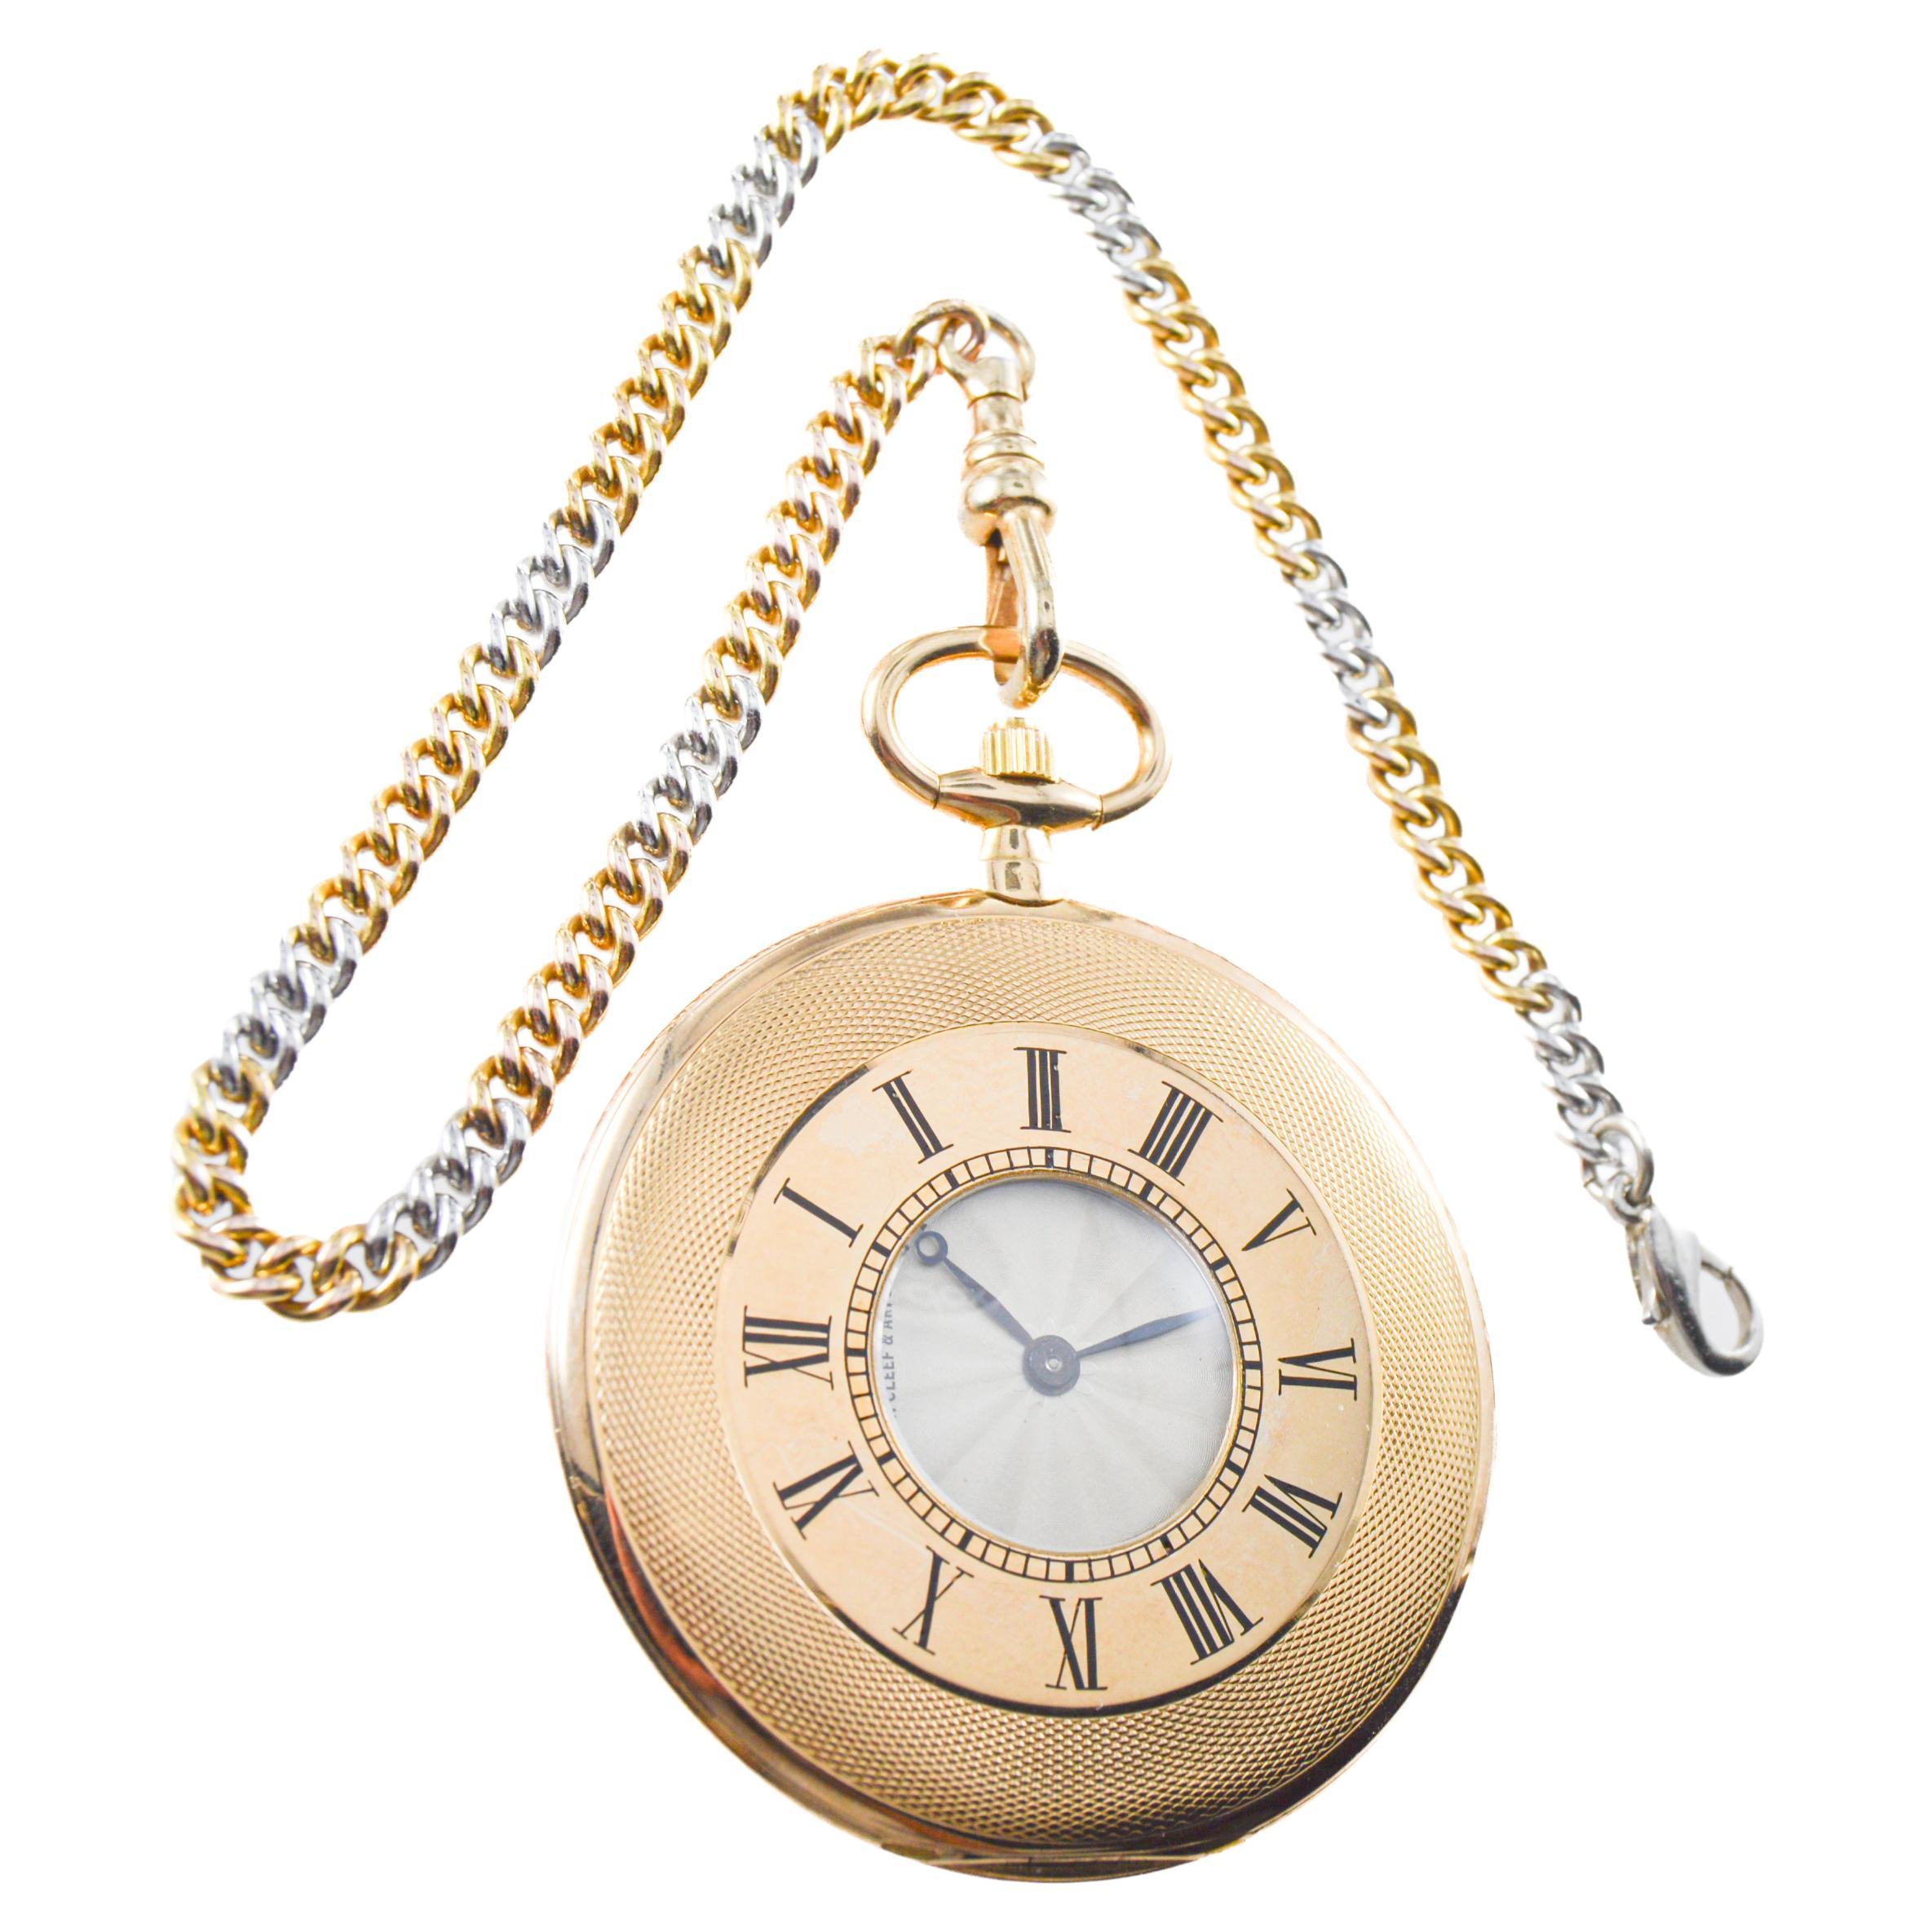 FACTORY / HOUSE: Van Cleef & Arpels 
STYLE / REFERENCE: 1/2 Hunter Pocket Watch / Ultra Thin
METAL / MATERIAL: 18Kt. Yellow Gold
CIRCA / YEAR: 1930's
DIMENSIONS / SIZE: Diameter 54mm
MOVEMENT / CALIBER: Manual Winding / 17 Jewels 
DIAL / HANDS: